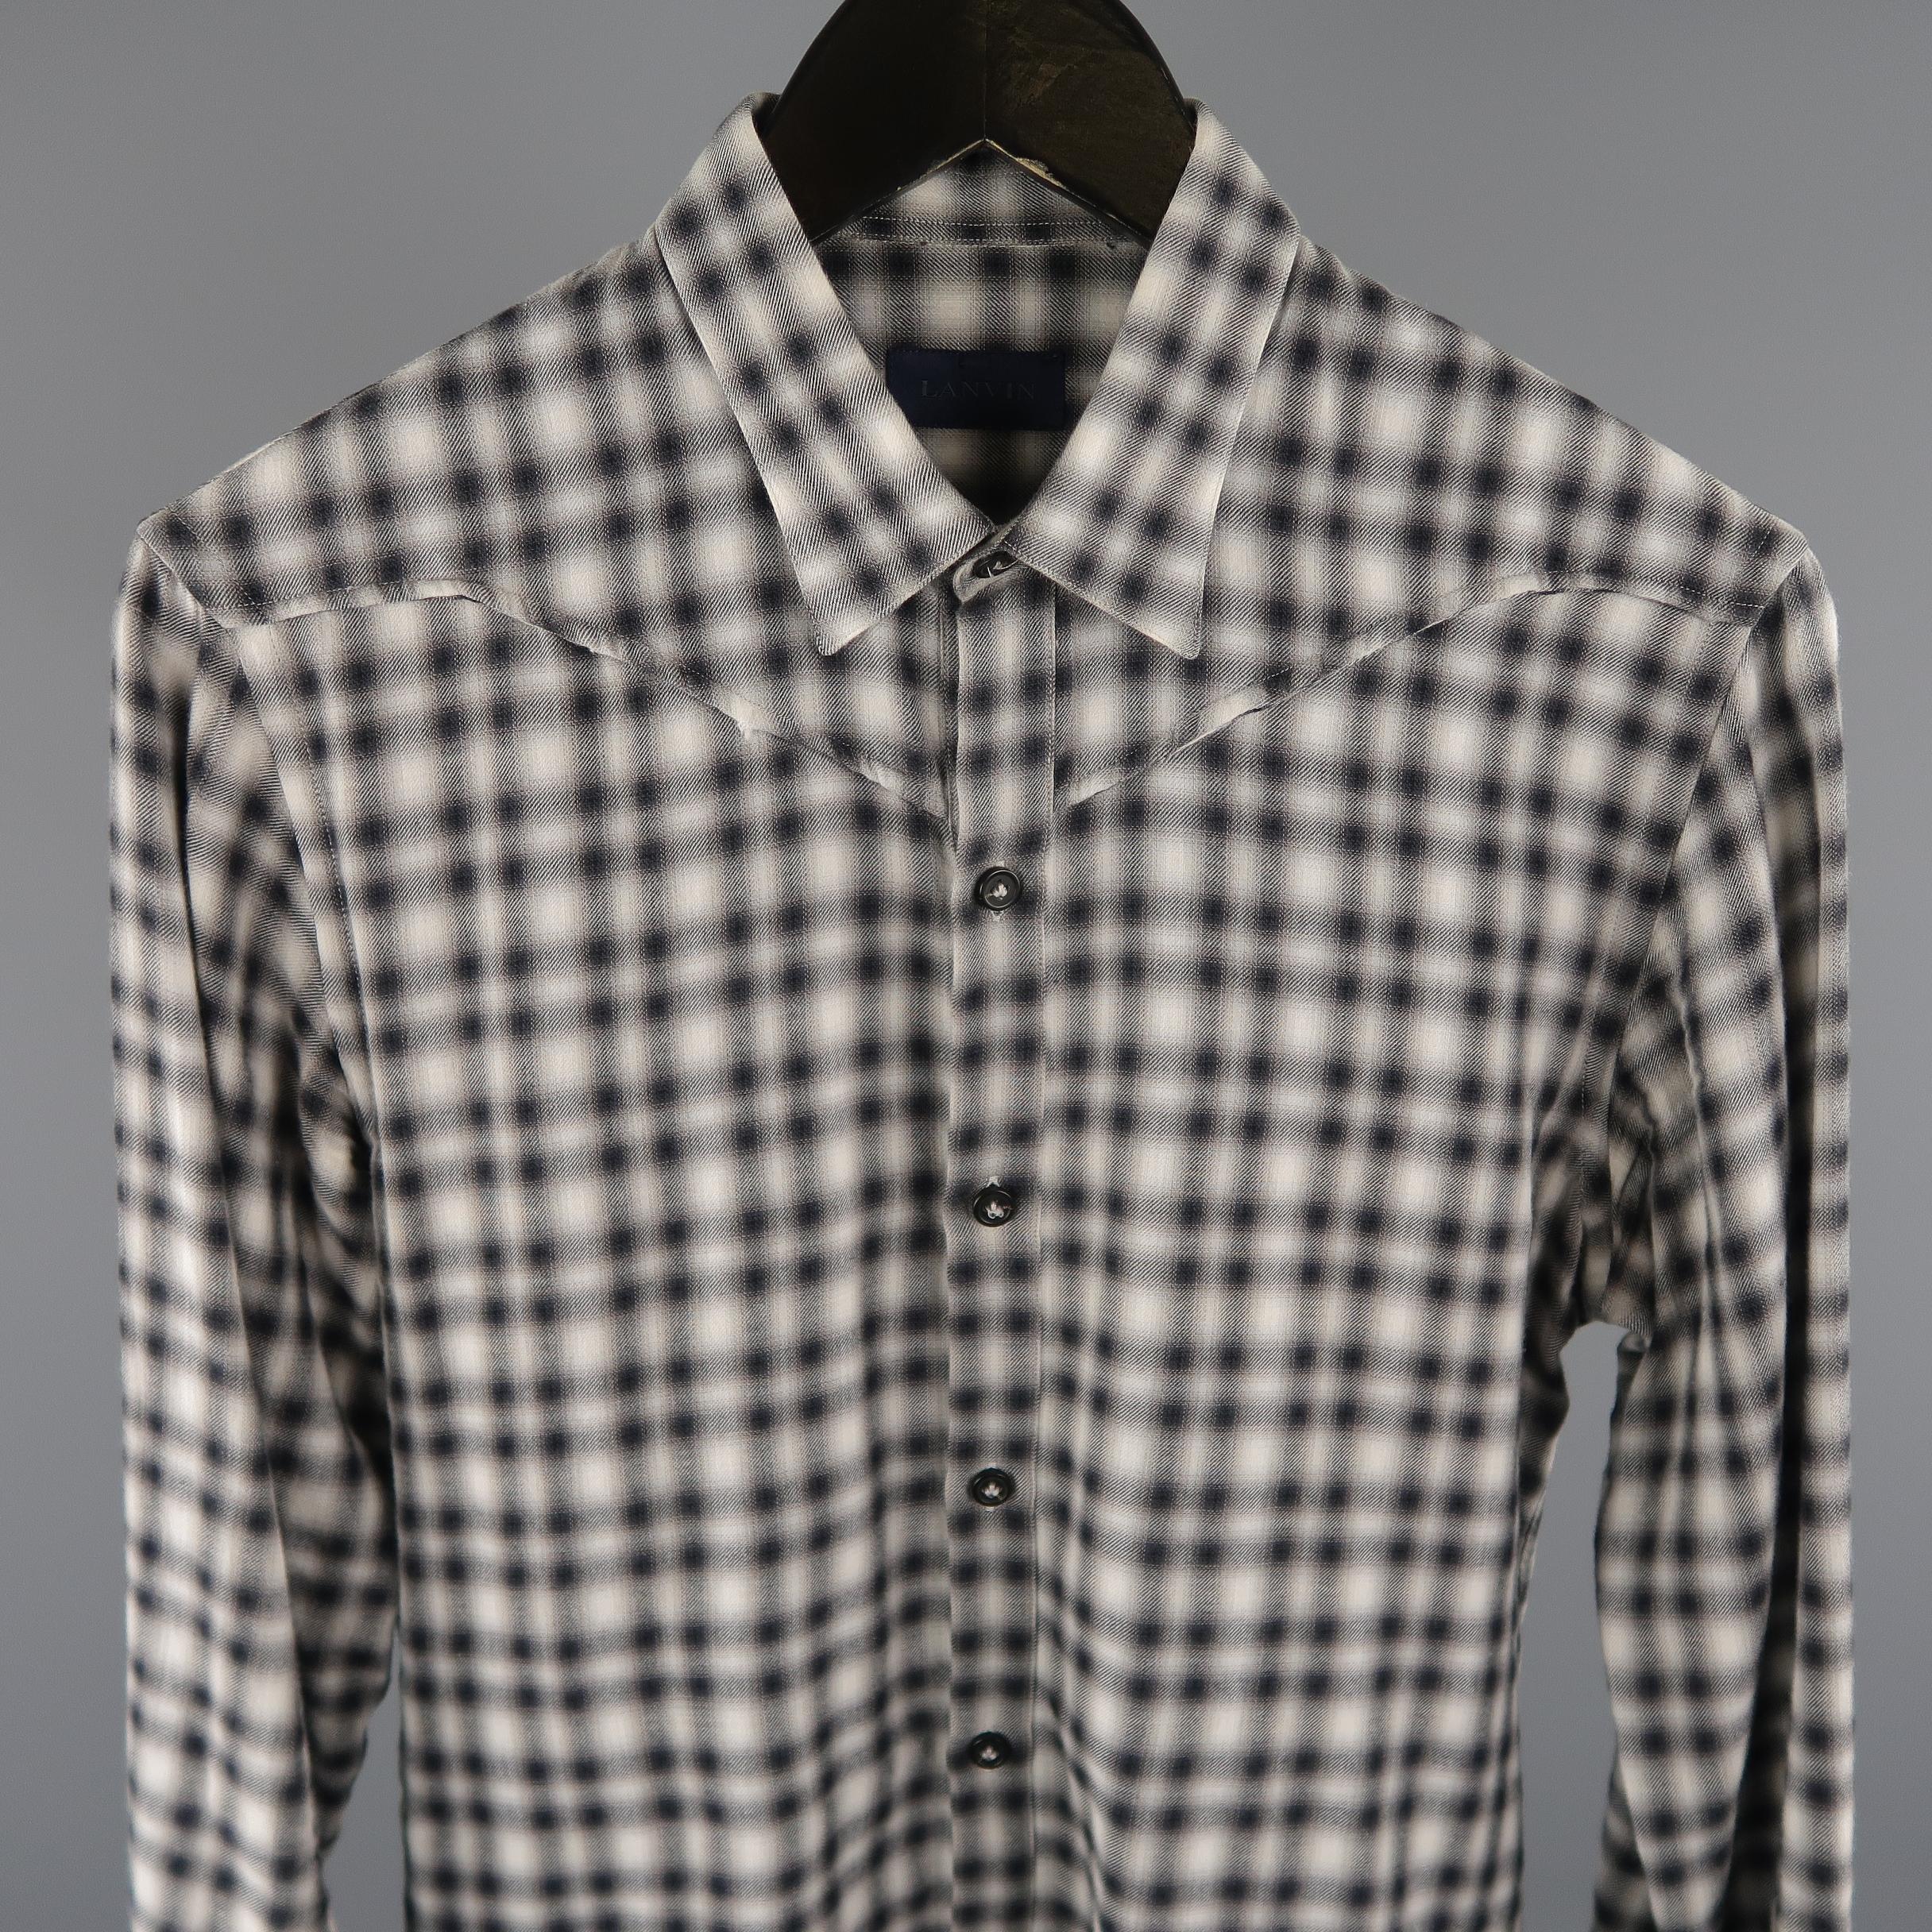 LANVIN  shirt come in tones of grey, in a plaid cotton with a pointed button down collar and long sleeves. Minor wear.  Made in Italy.
 
Good Pre-Owned Condition.
Marked: 38 IT
 
Measurements:
 
Shoulder: 16 in.
Chest: 39 in.
Sleeve: 26 in.
Length: